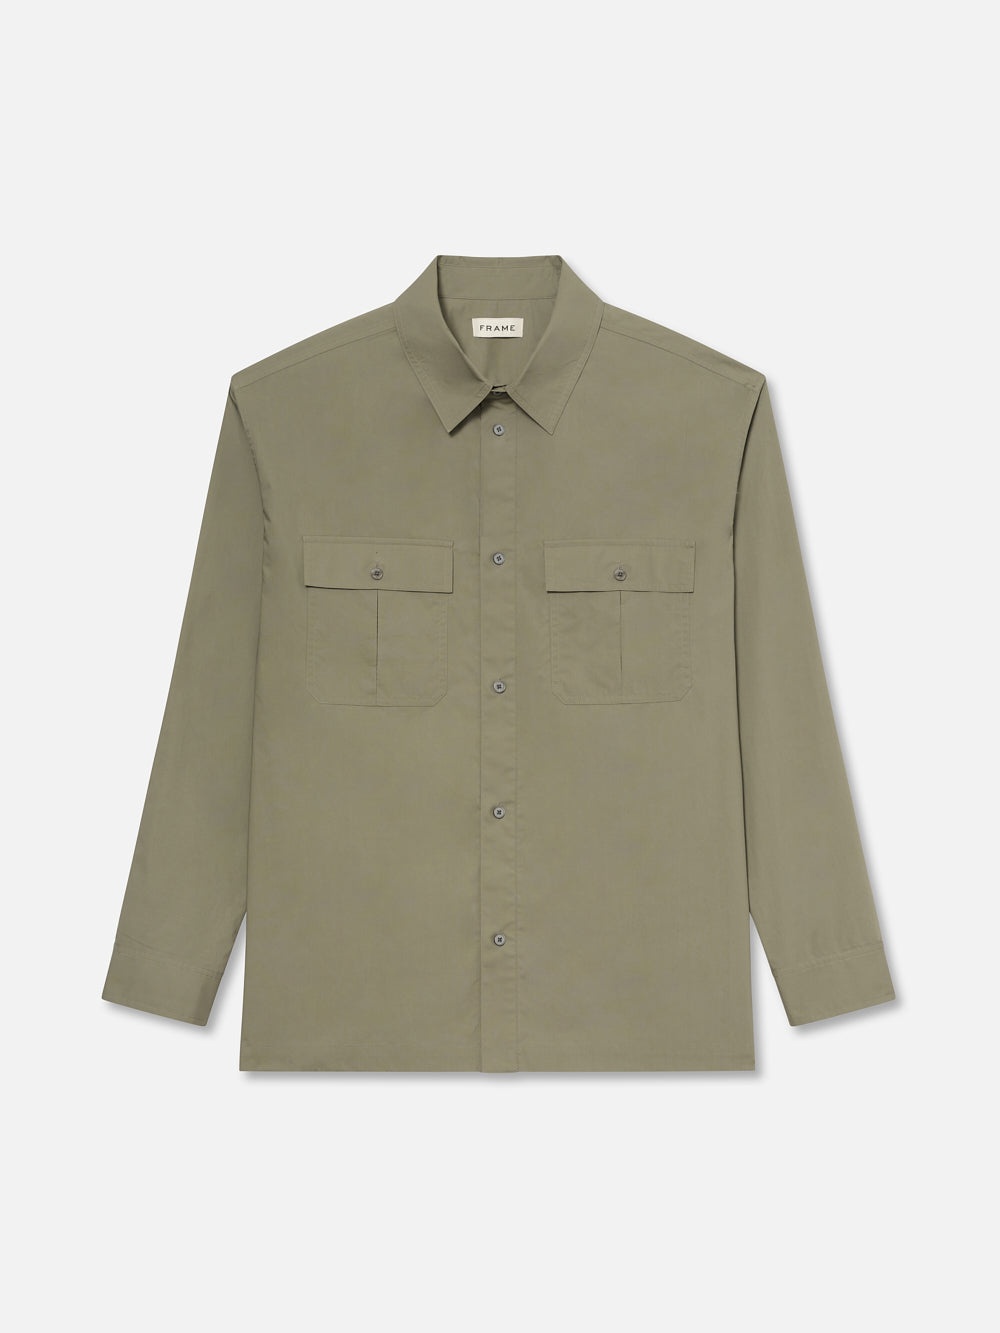 Military Shirt in Dry Sage - 1